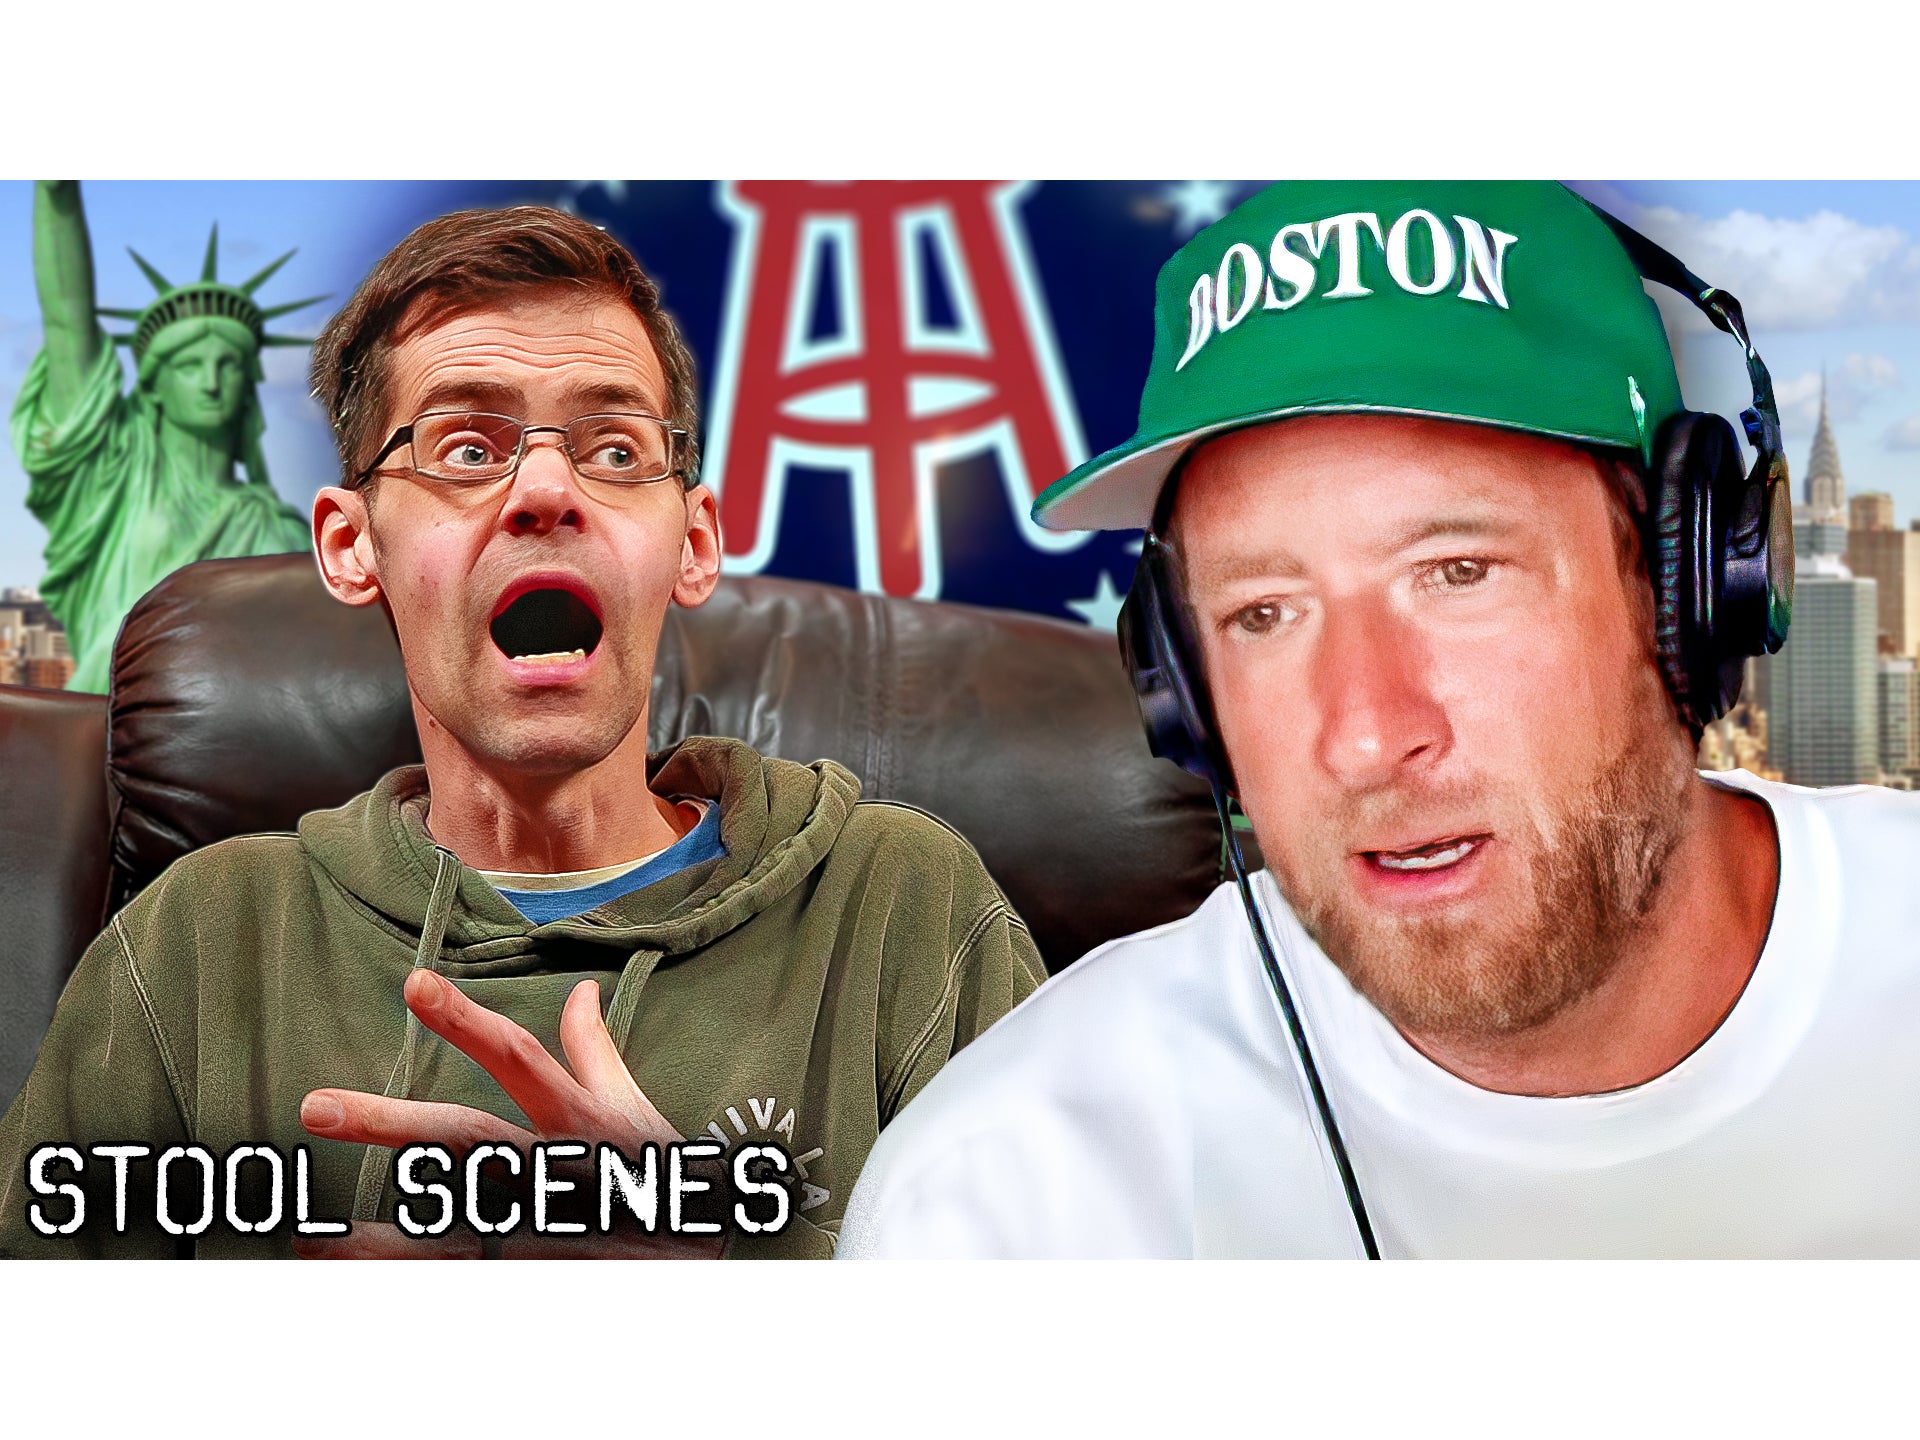 Barstool Employee Calls Out Dave Portnoy's Leadership | Stool Scenes